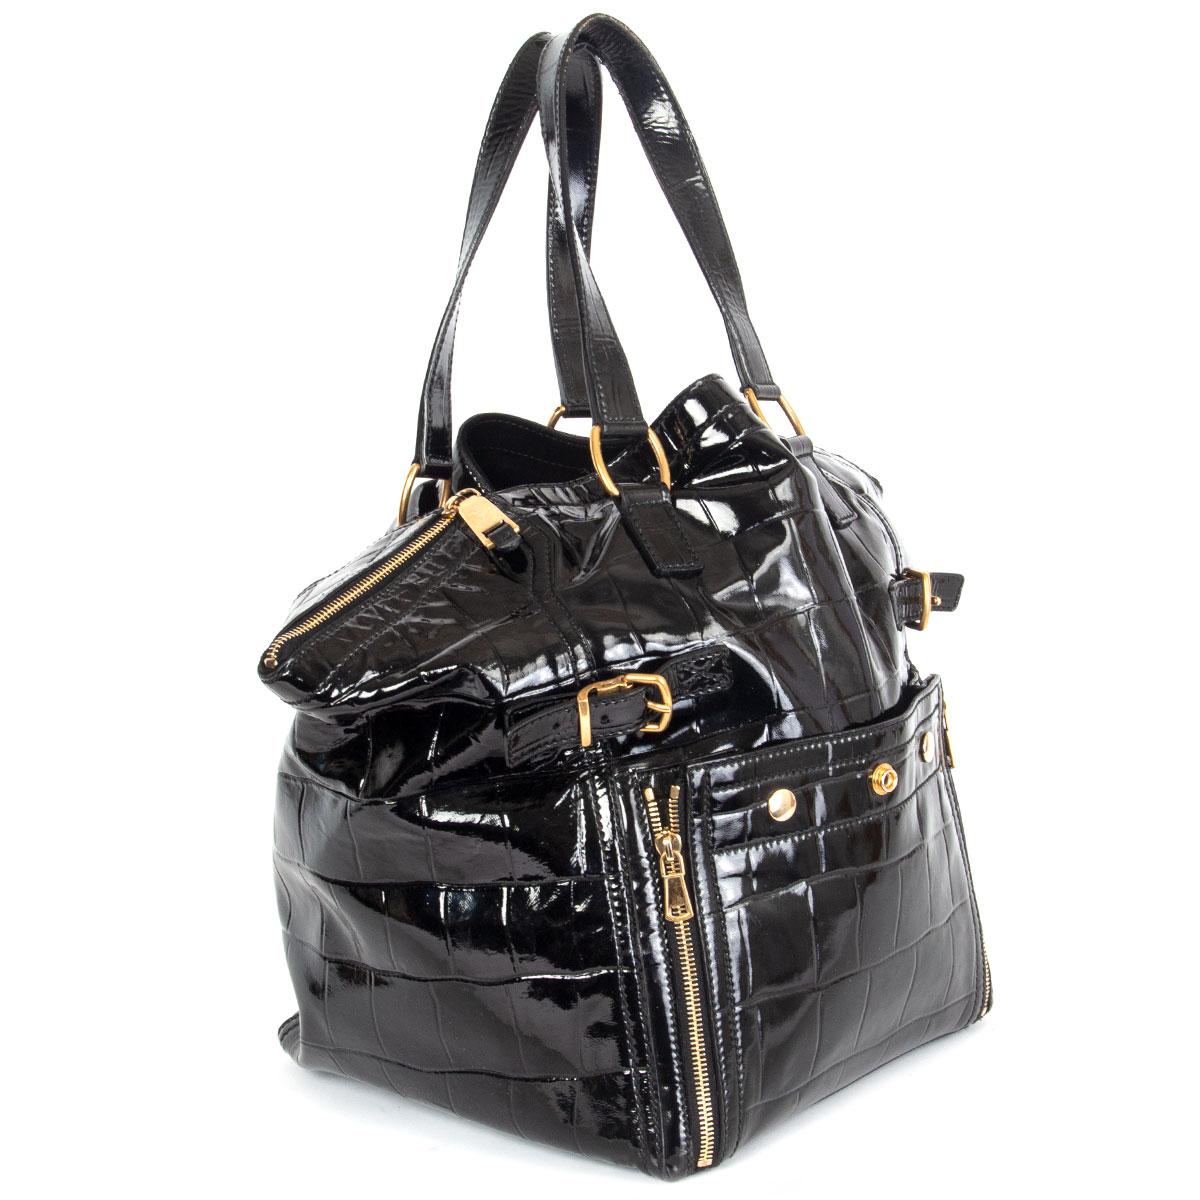 100% authentic Yves Saint Laurent 'Downtown Paris' tote bag in black crocodile embossed calfskin patent leather featuring gold-tone hardware. It has two top handles, hand pressed rivets, a patch pocket in front with zippers that allow expansion, two